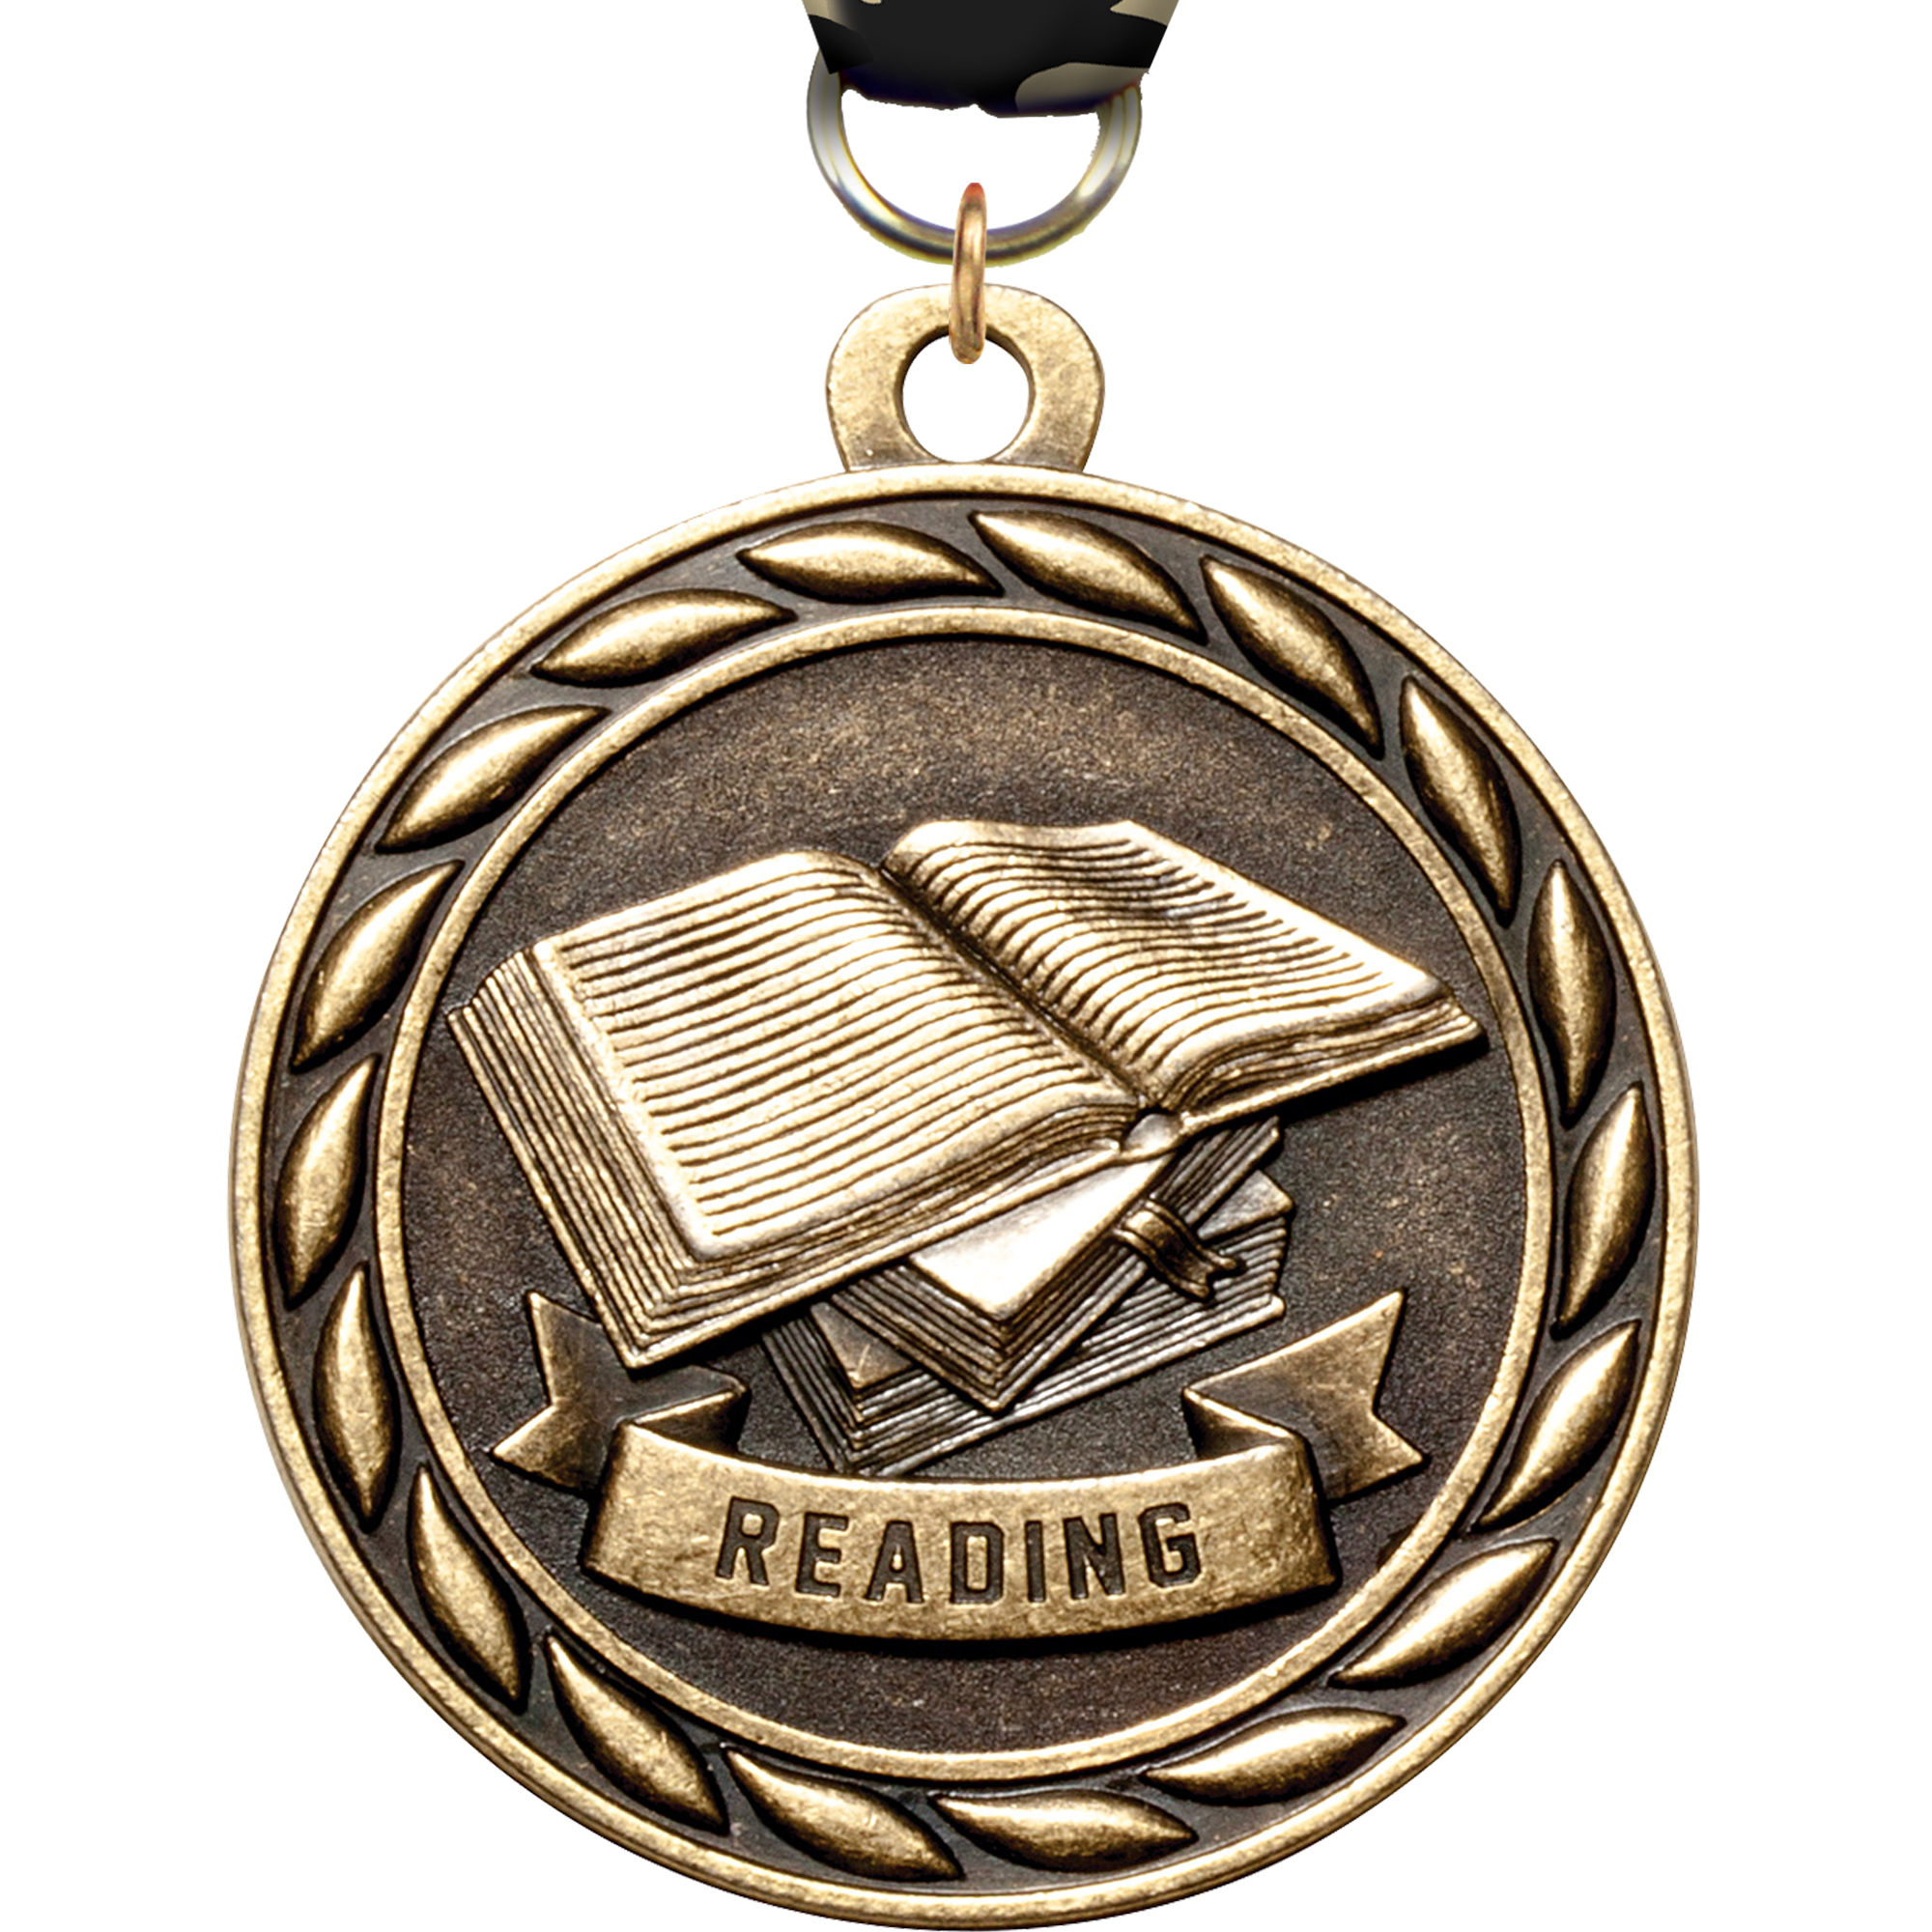 Reading Scholastic Medal- Gold